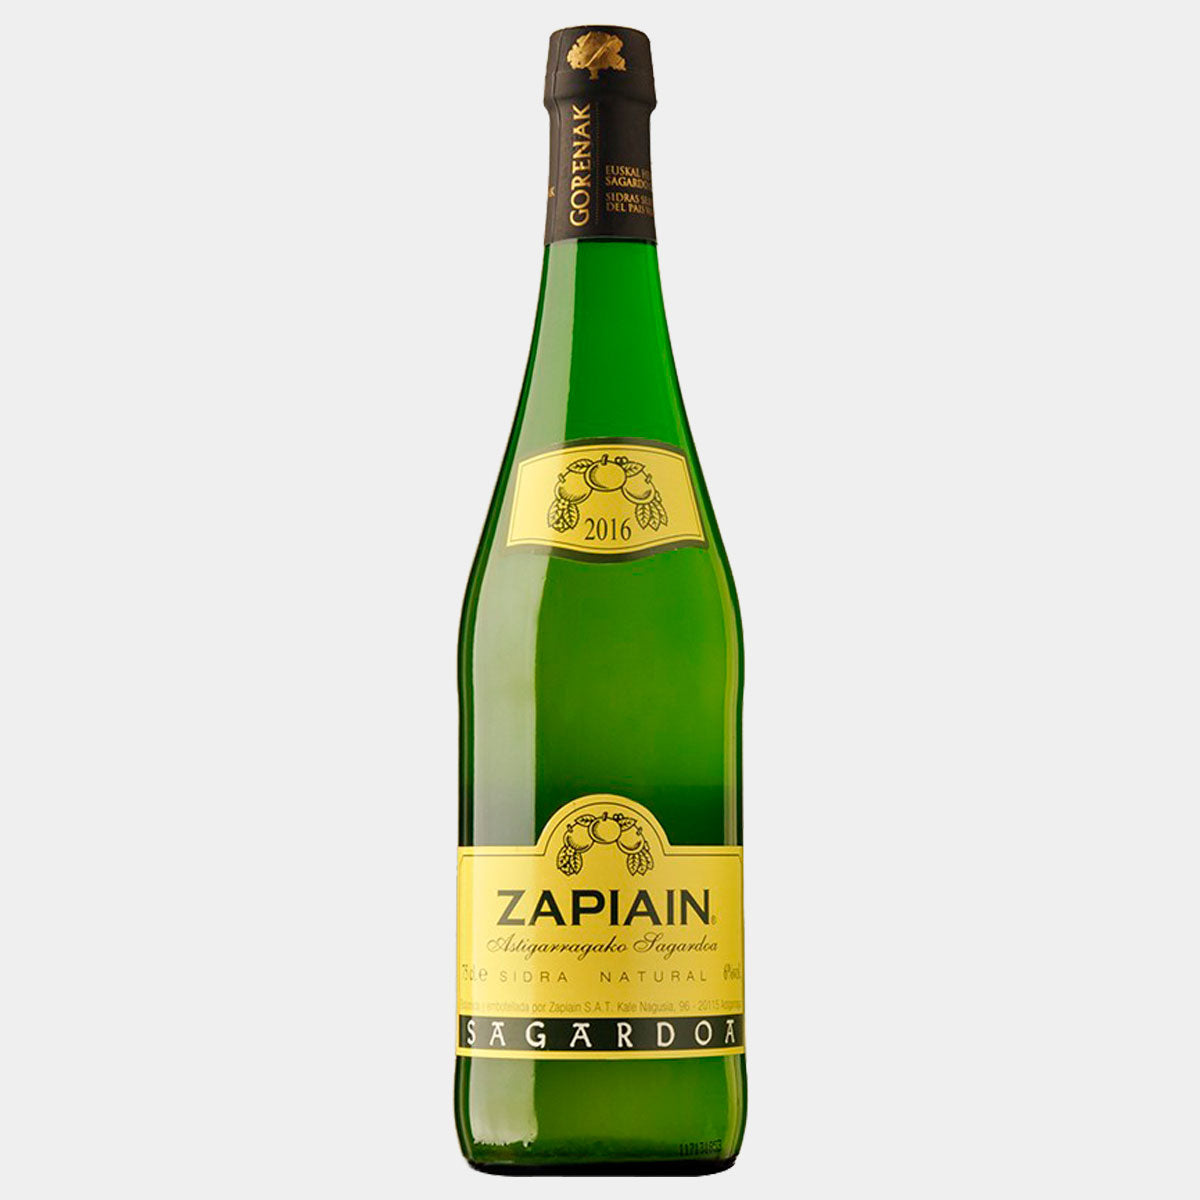 Sidra Natural Zapiain - Wines and Copas Barcelona